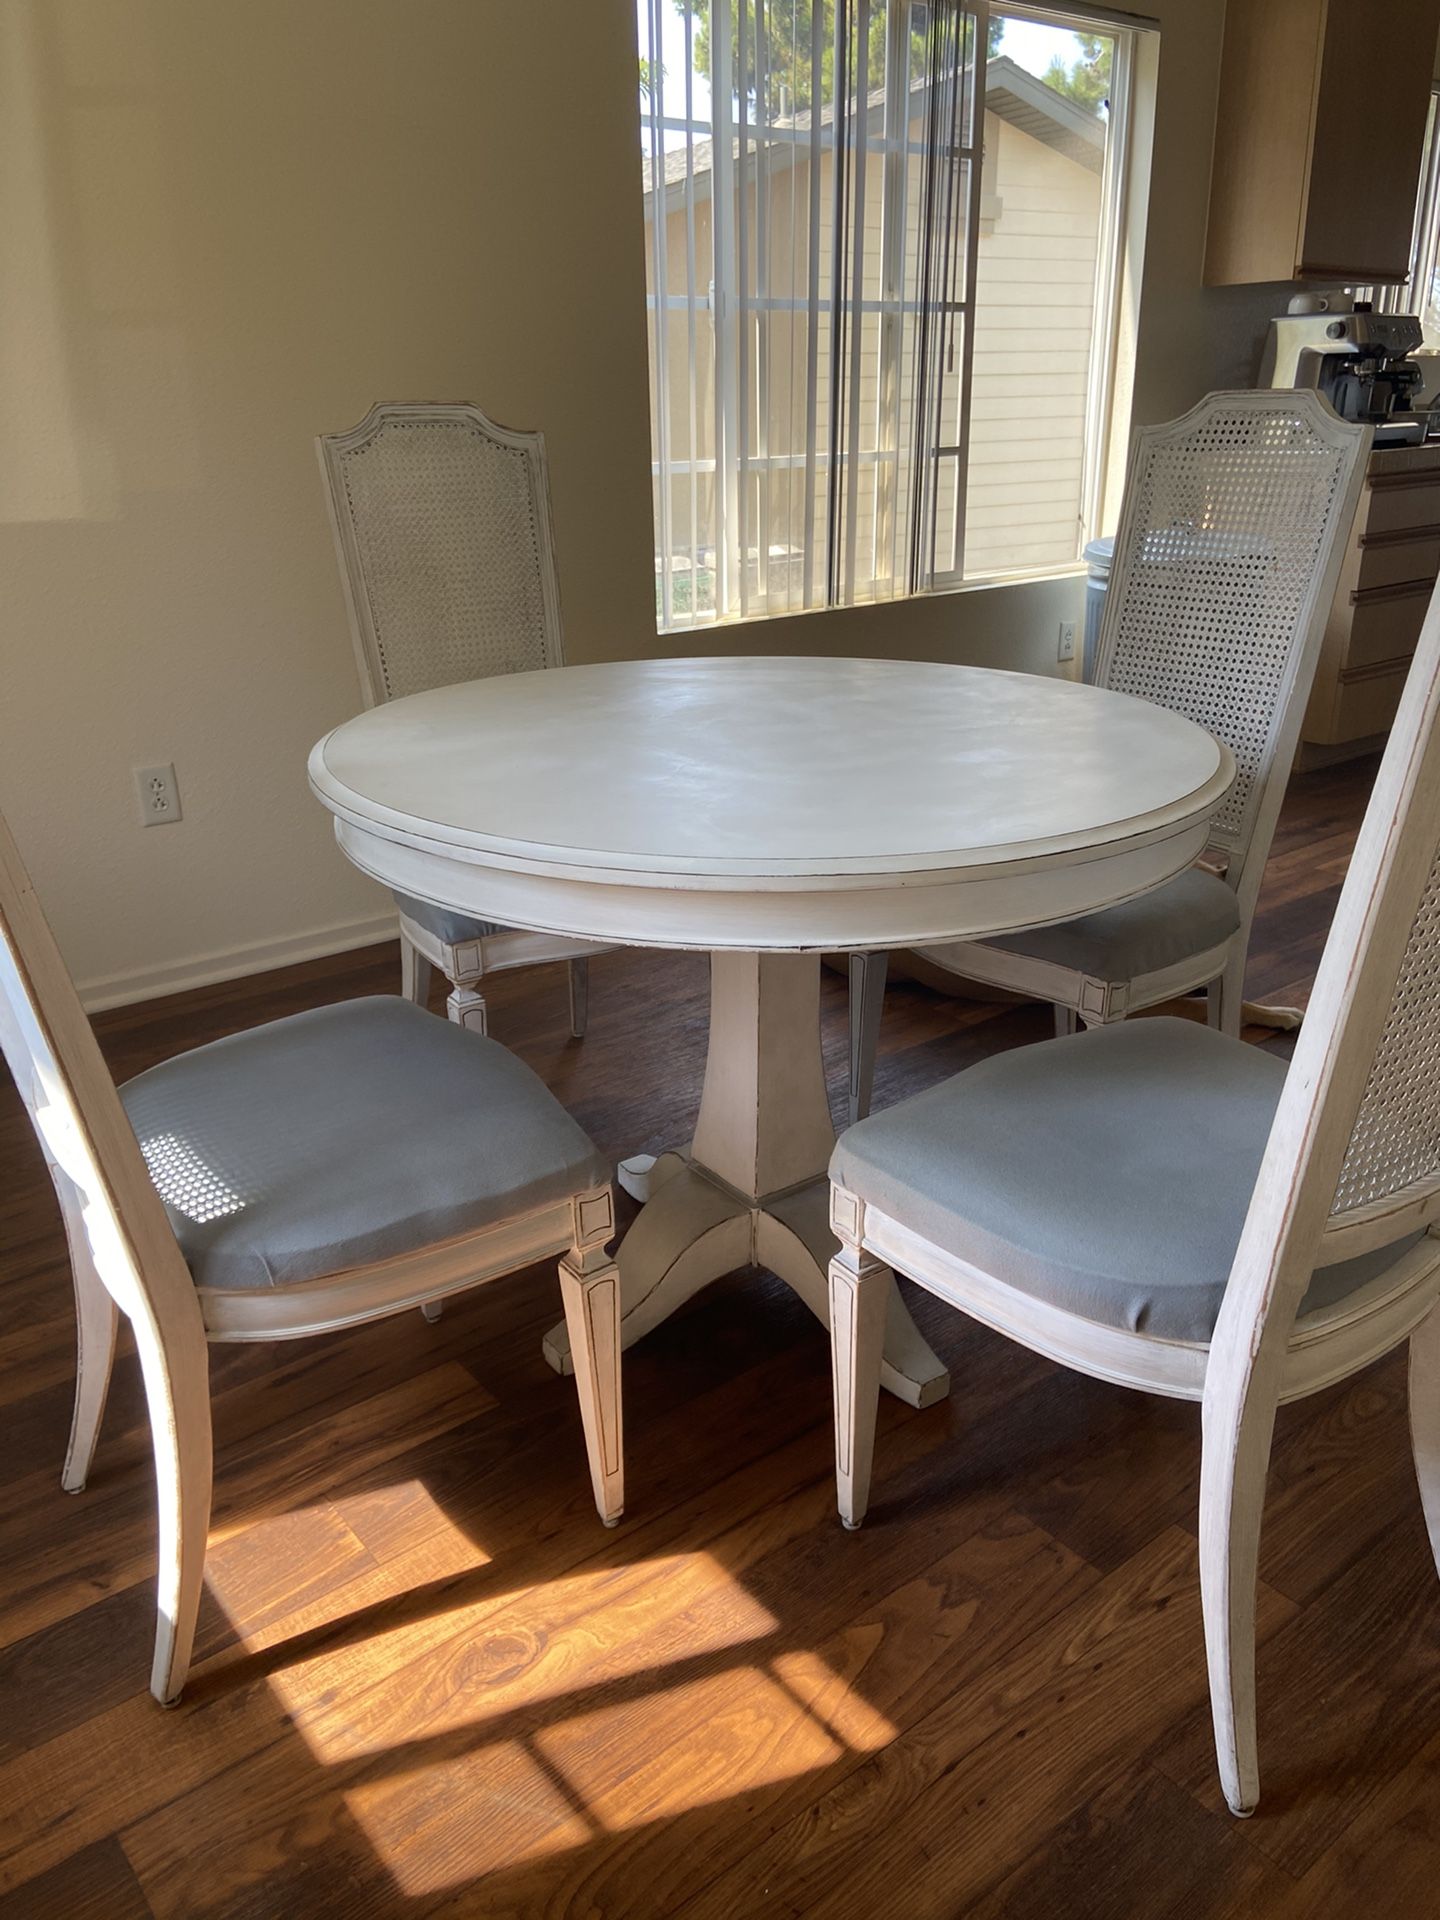 Kitchen table + 4 chairs solid wood